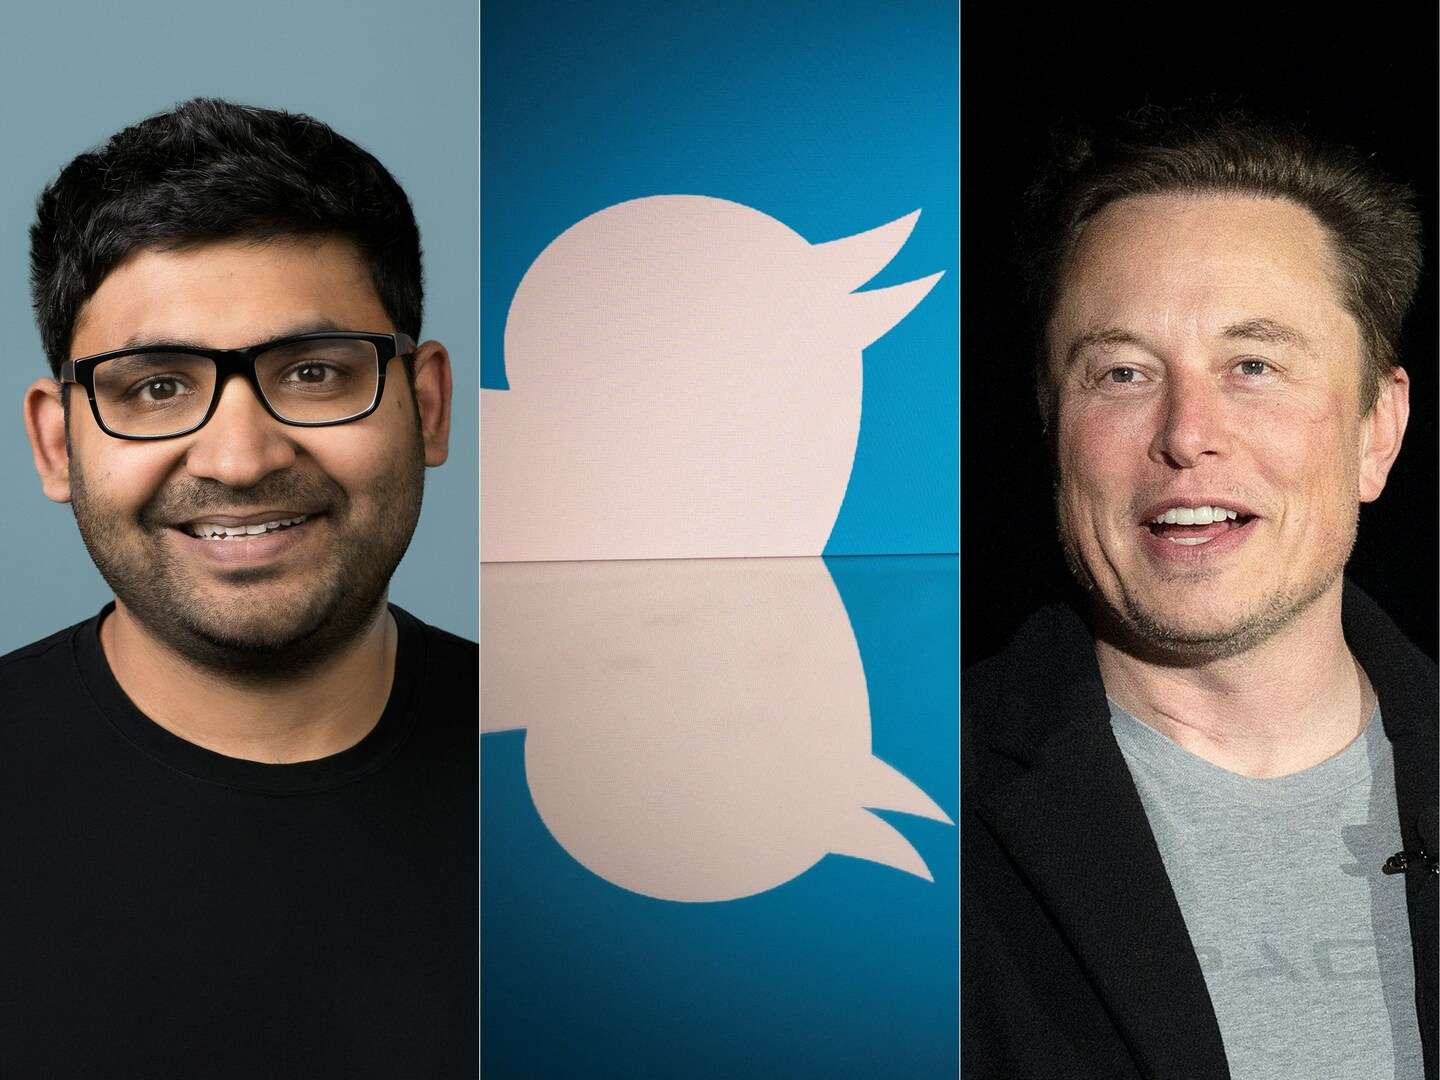 Top Twitter executives set to get $120 million in golden parachutes